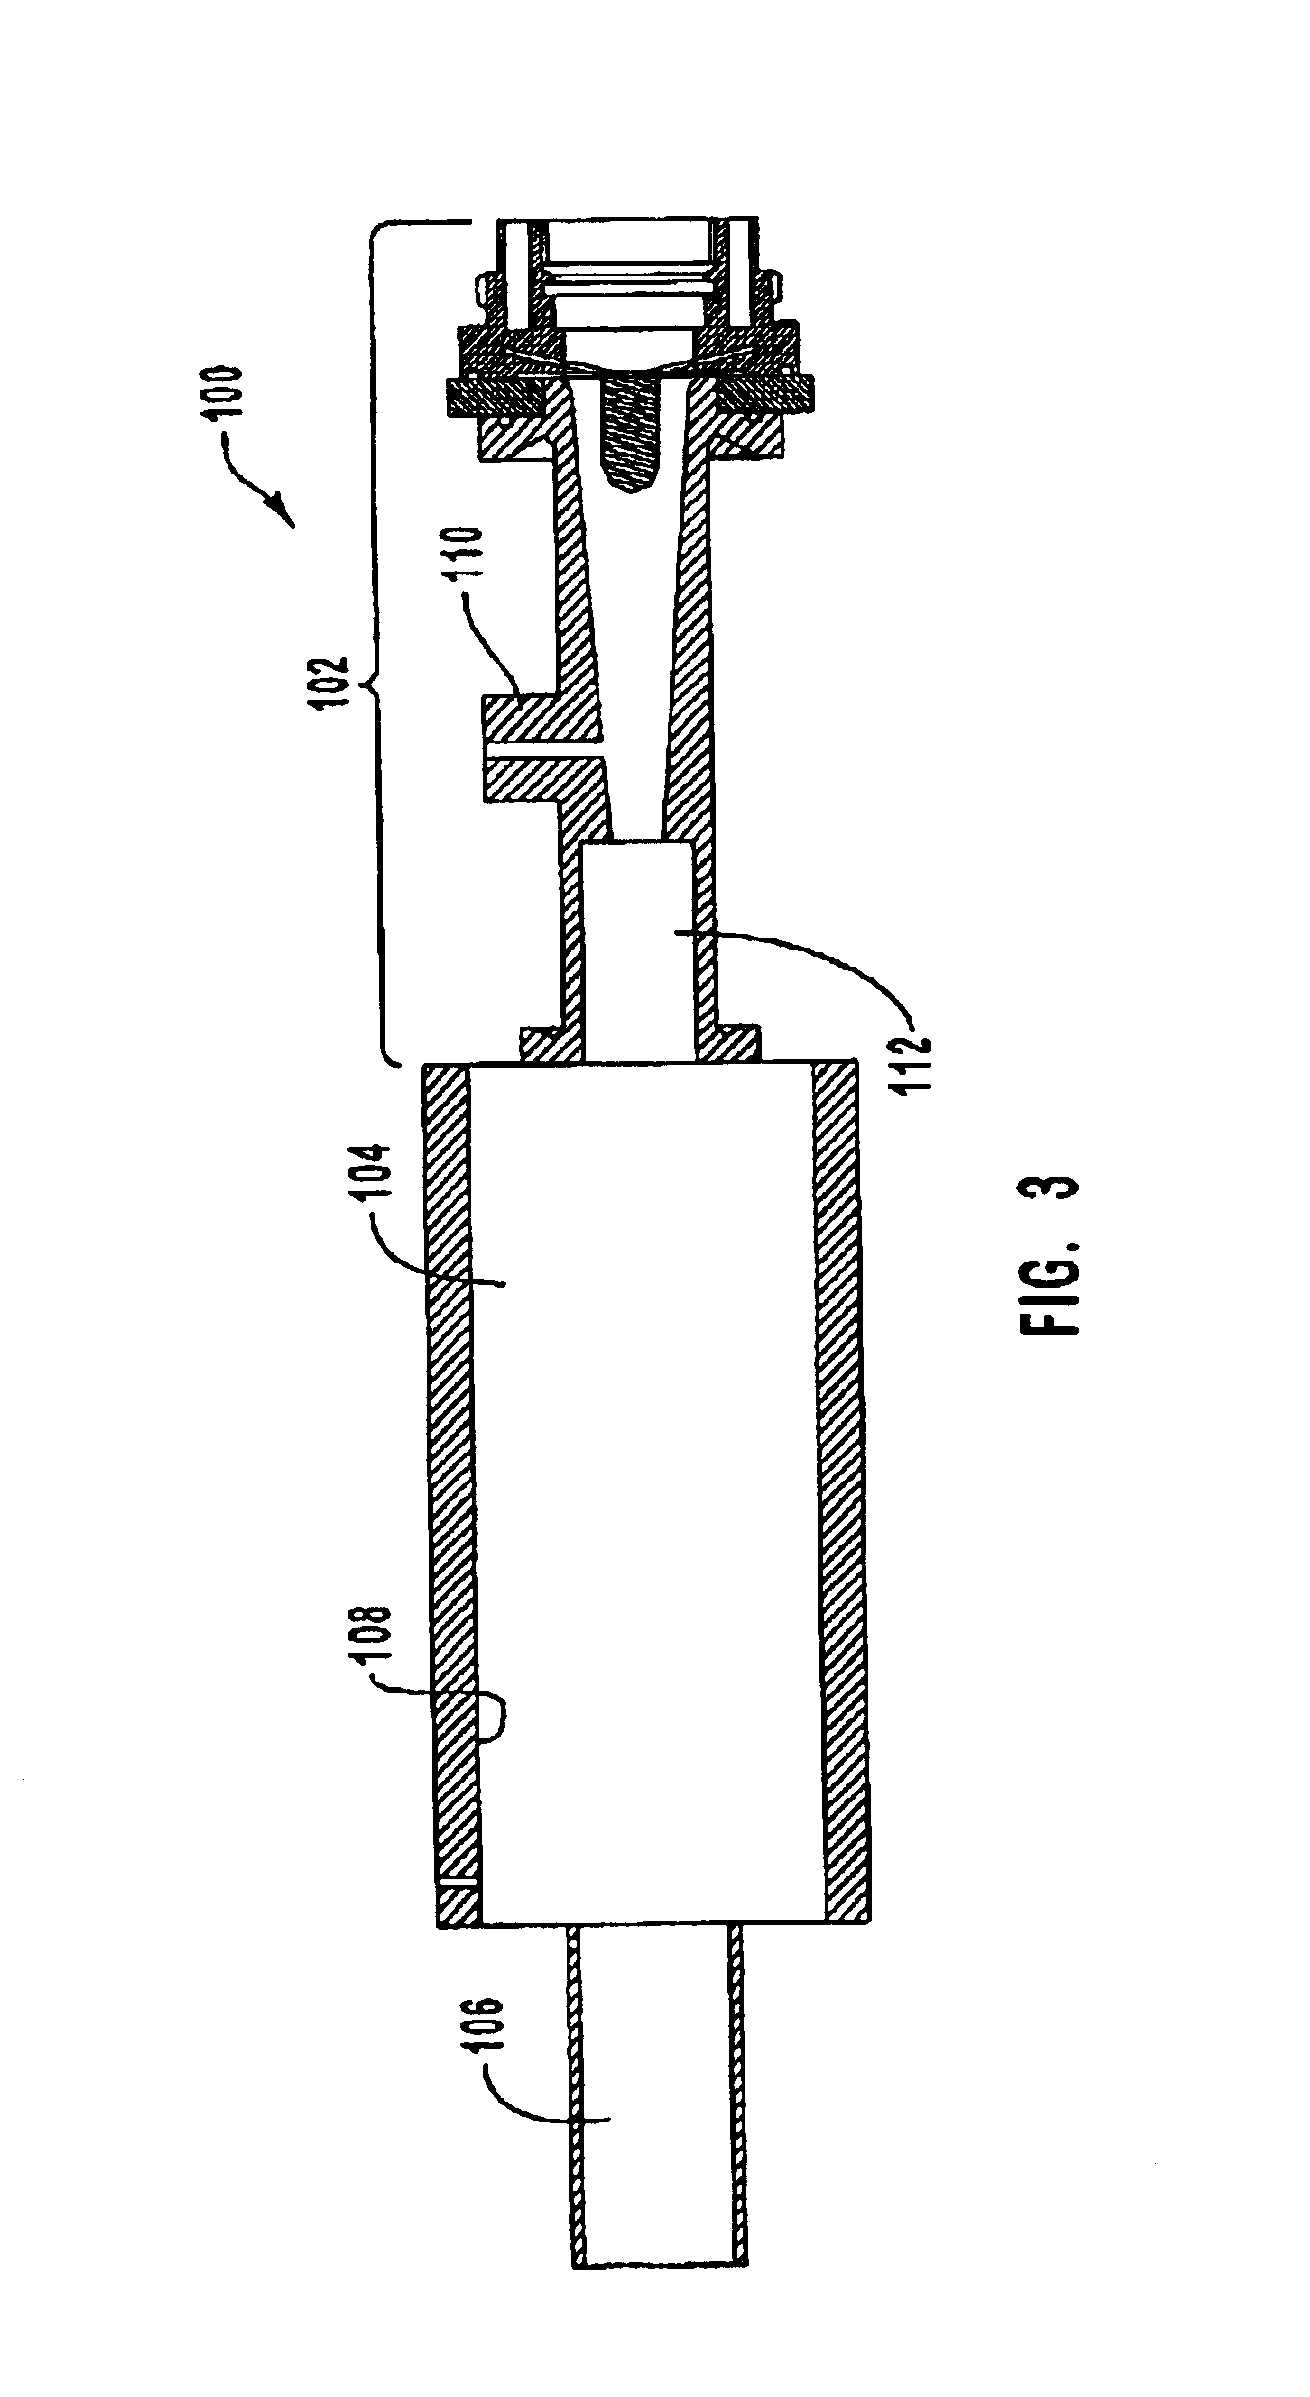 Thermal synthesis apparatus and process